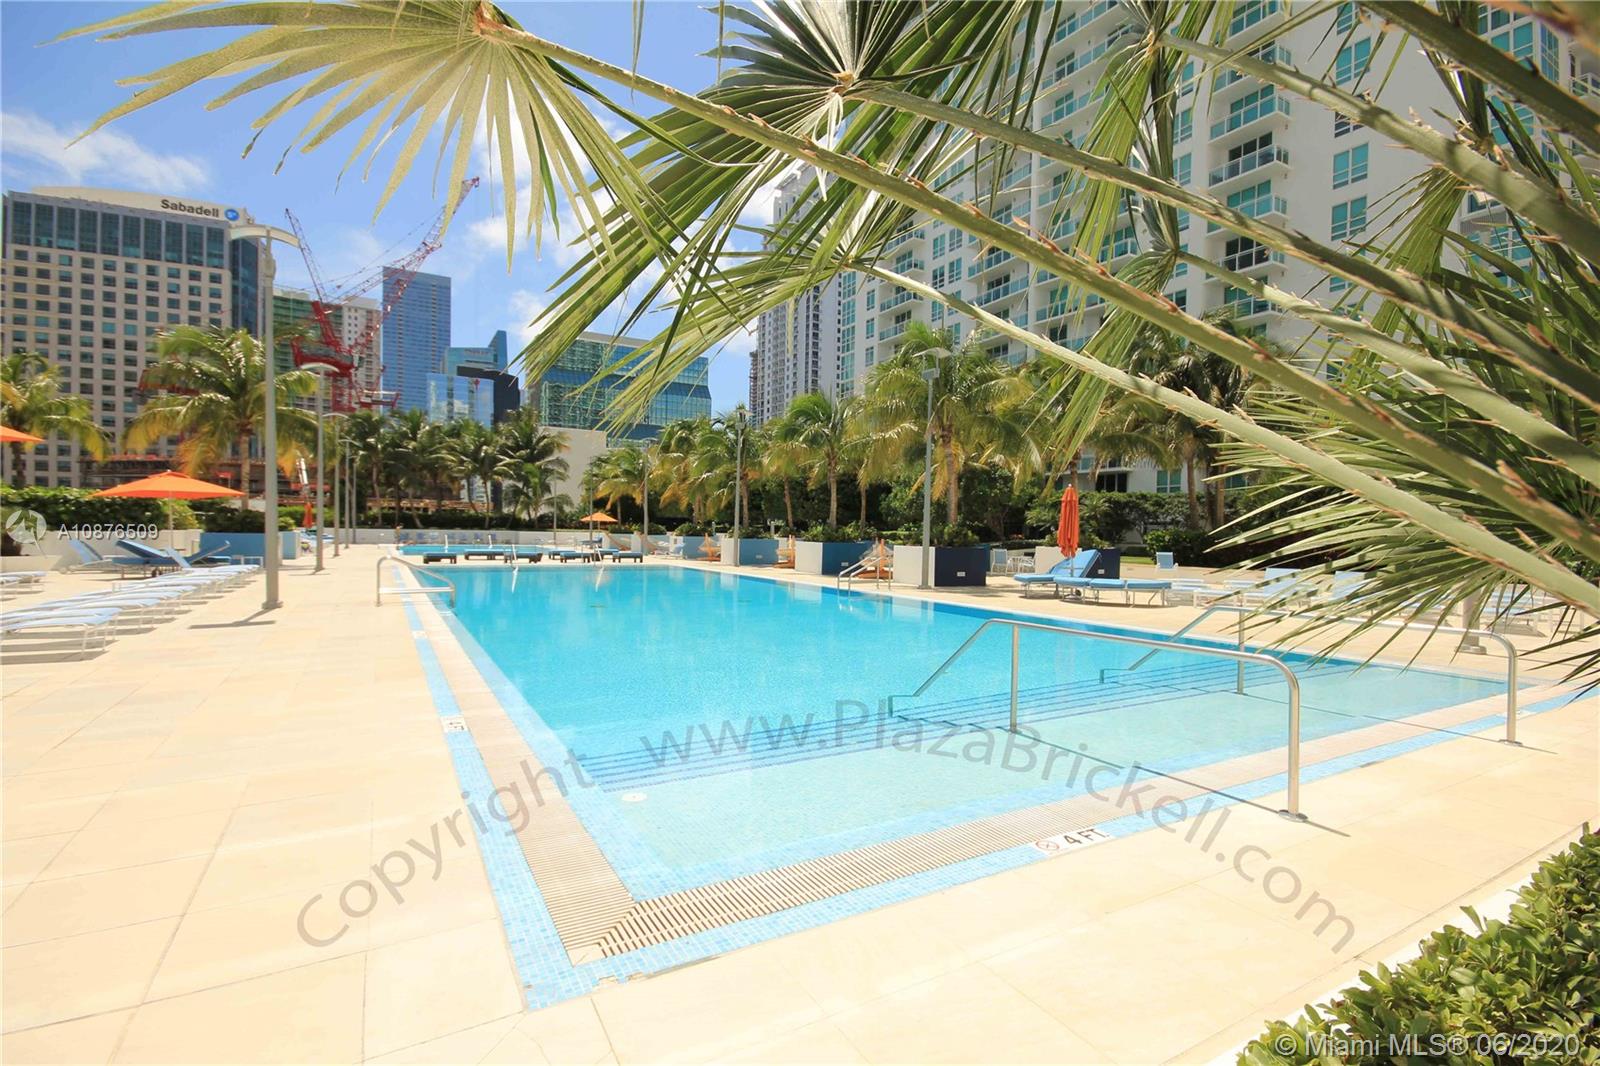 The Plaza on Brickell South image #60